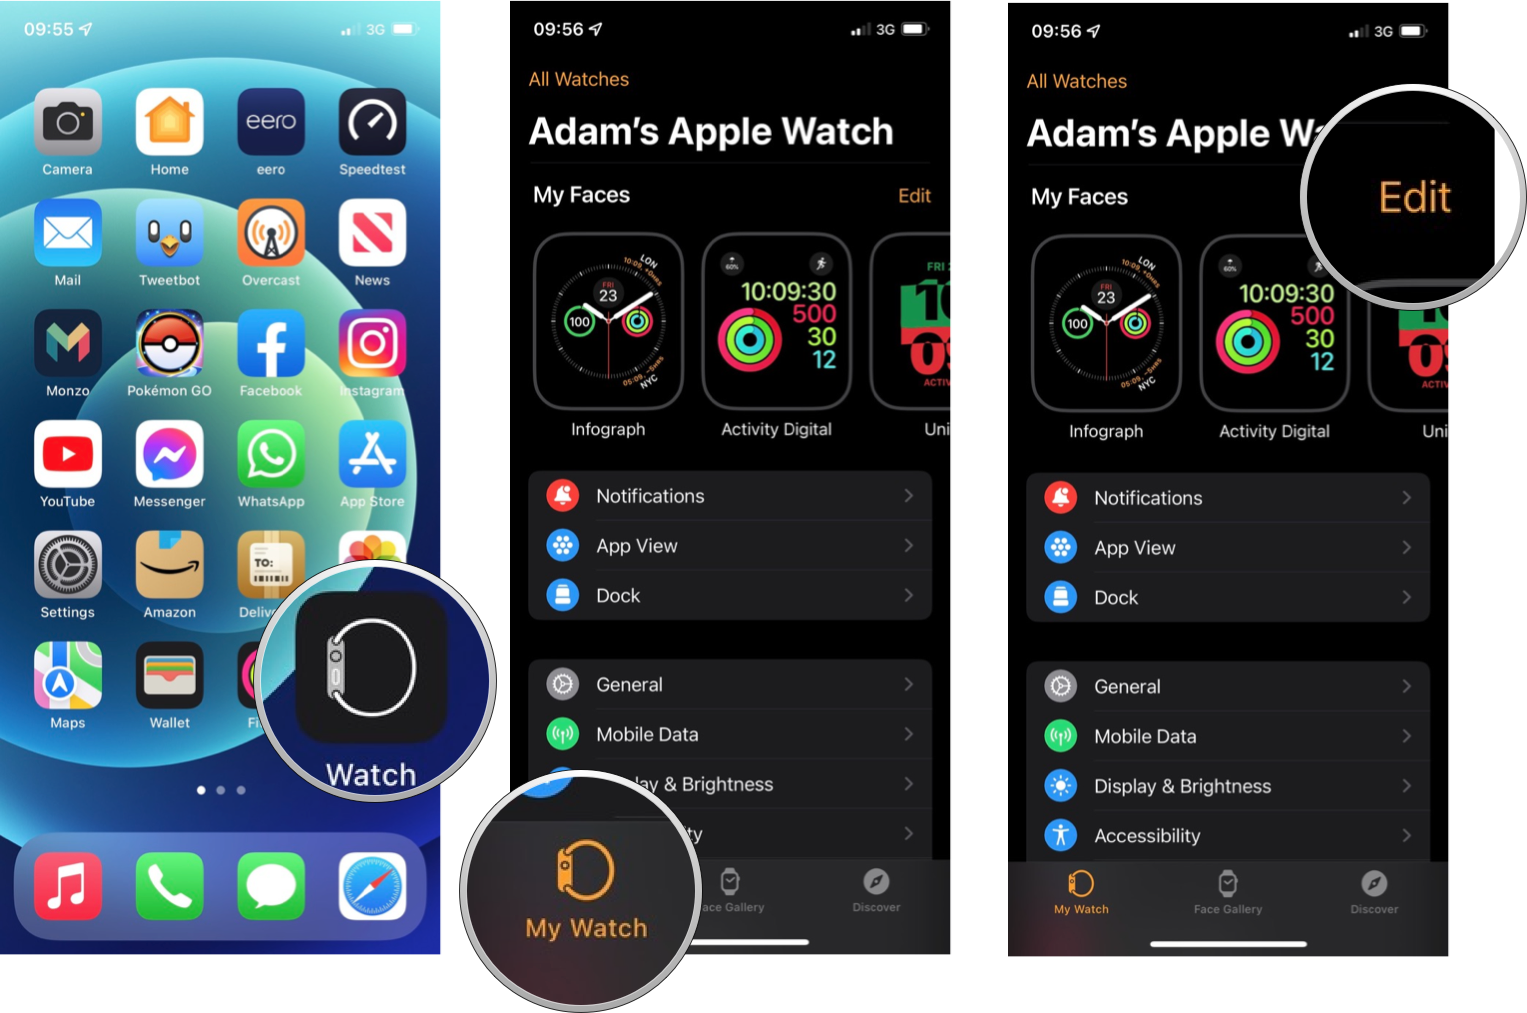 Remove the Apple Watch feature via iPhone: Open the Apple Watch app, tap My Watch, tap Edit